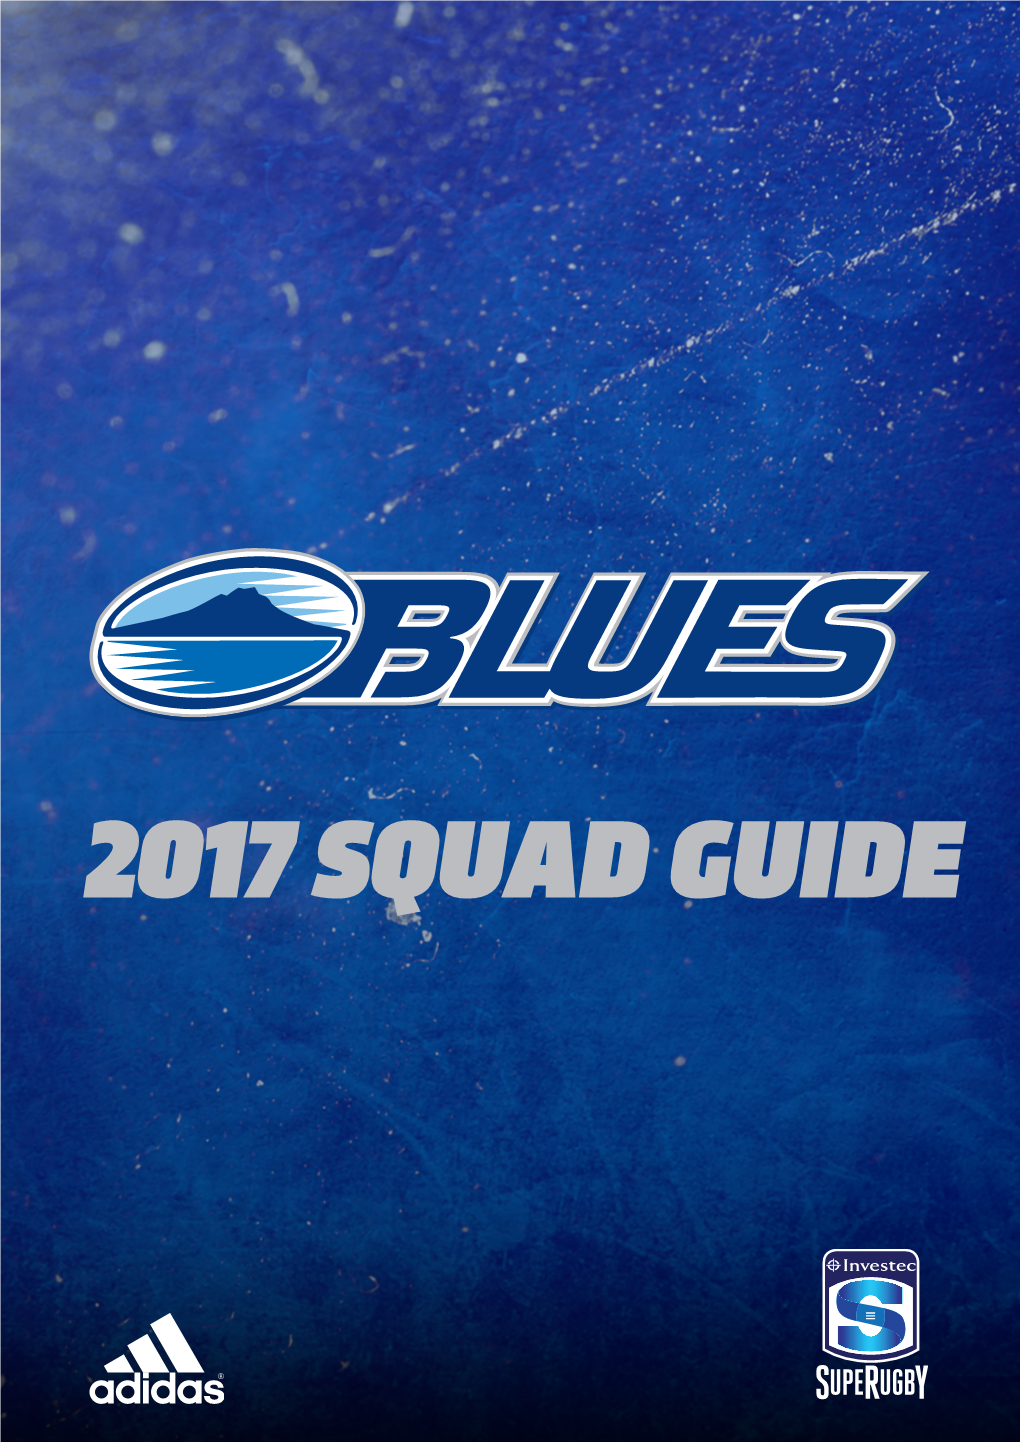 2017 SQUAD GUIDE 28 Campbell Crescent Epsom